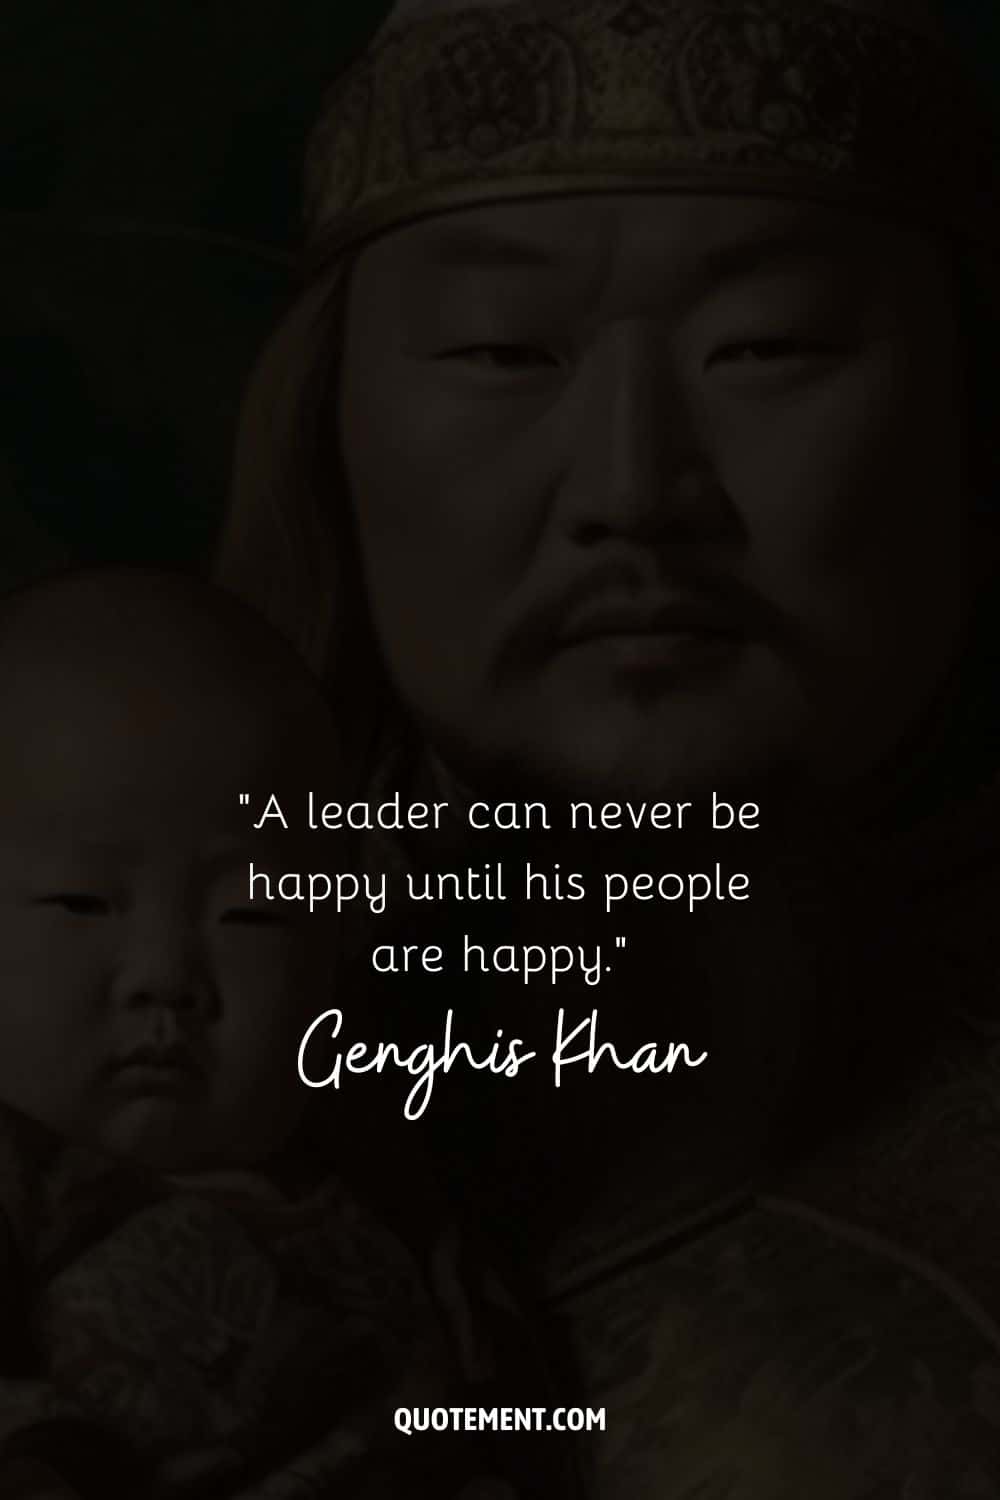 A leader can never be happy until his people are happy